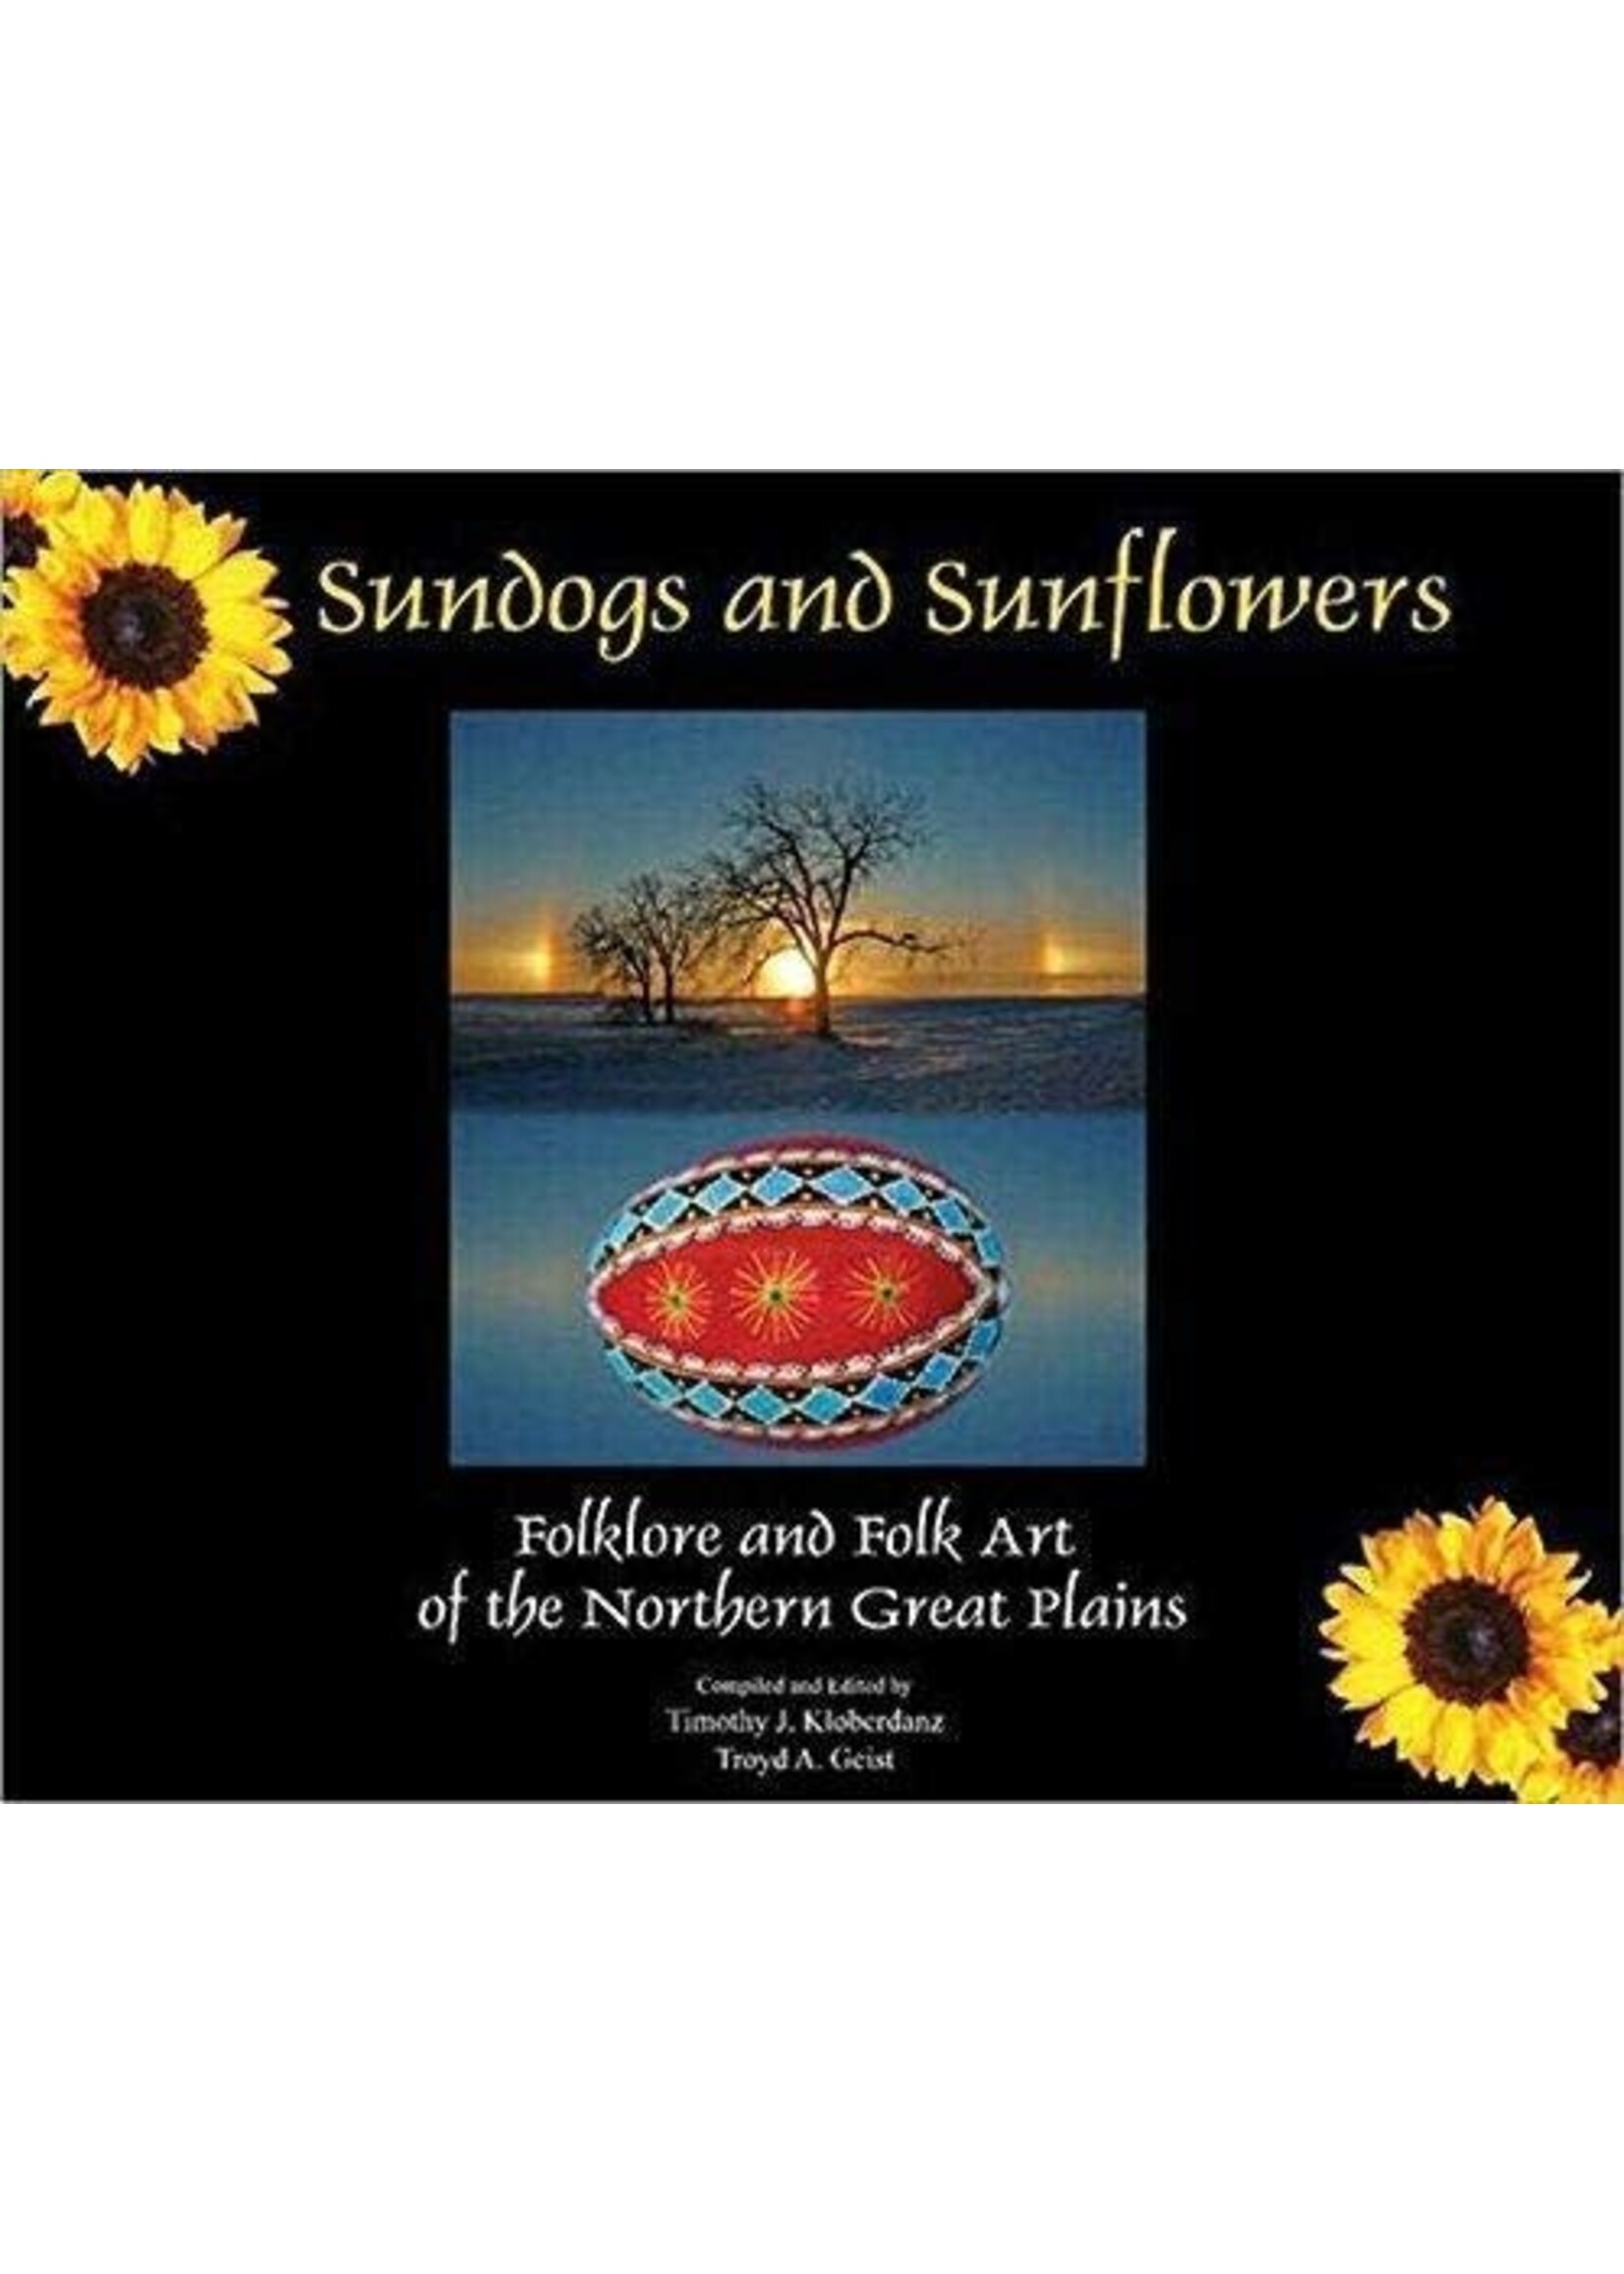 Sundogs and Sunflowers: Folklore and Folk Art of the Northern Great Plains